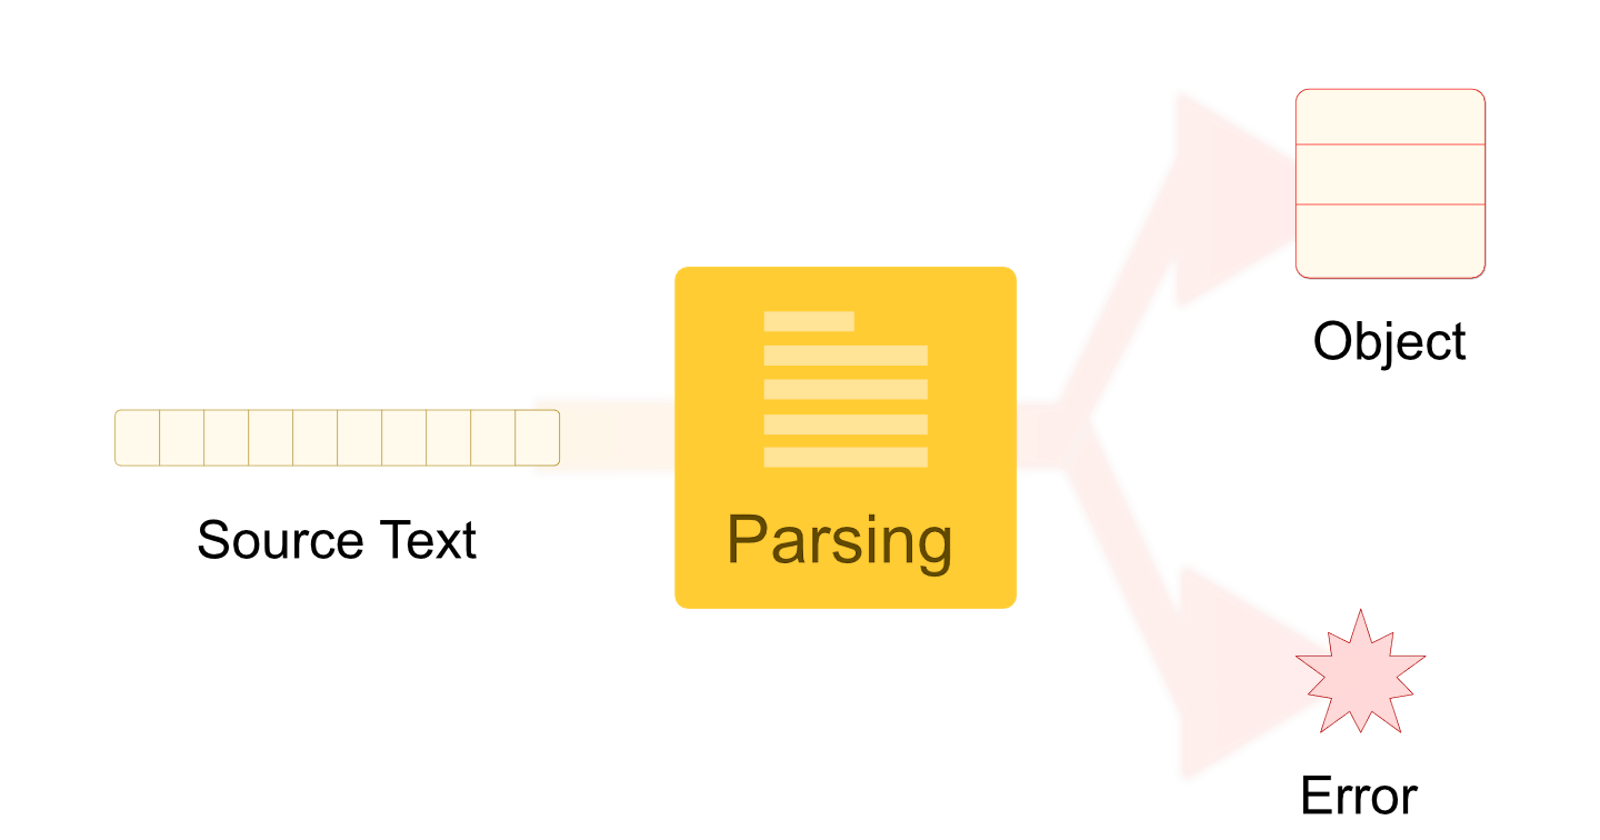 What is Parsing?